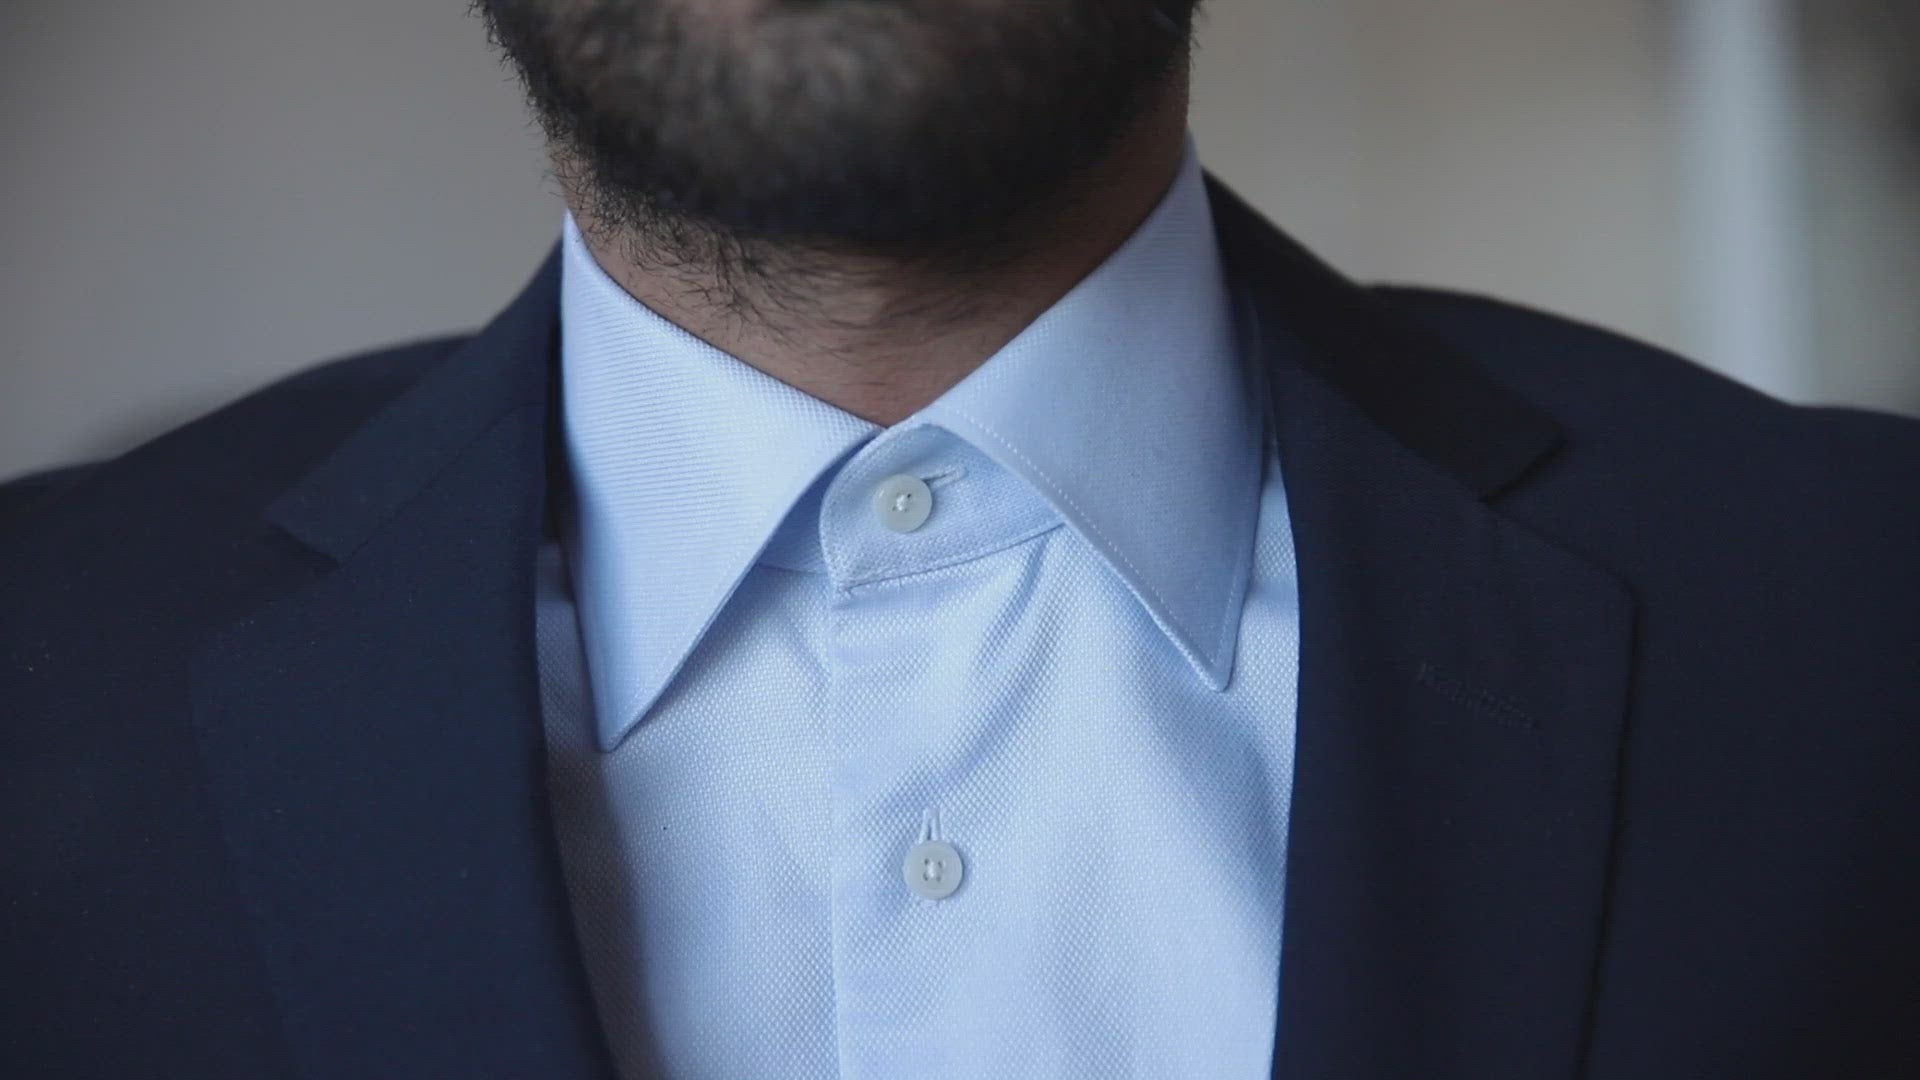 New video description of how to use a shirt collar extender